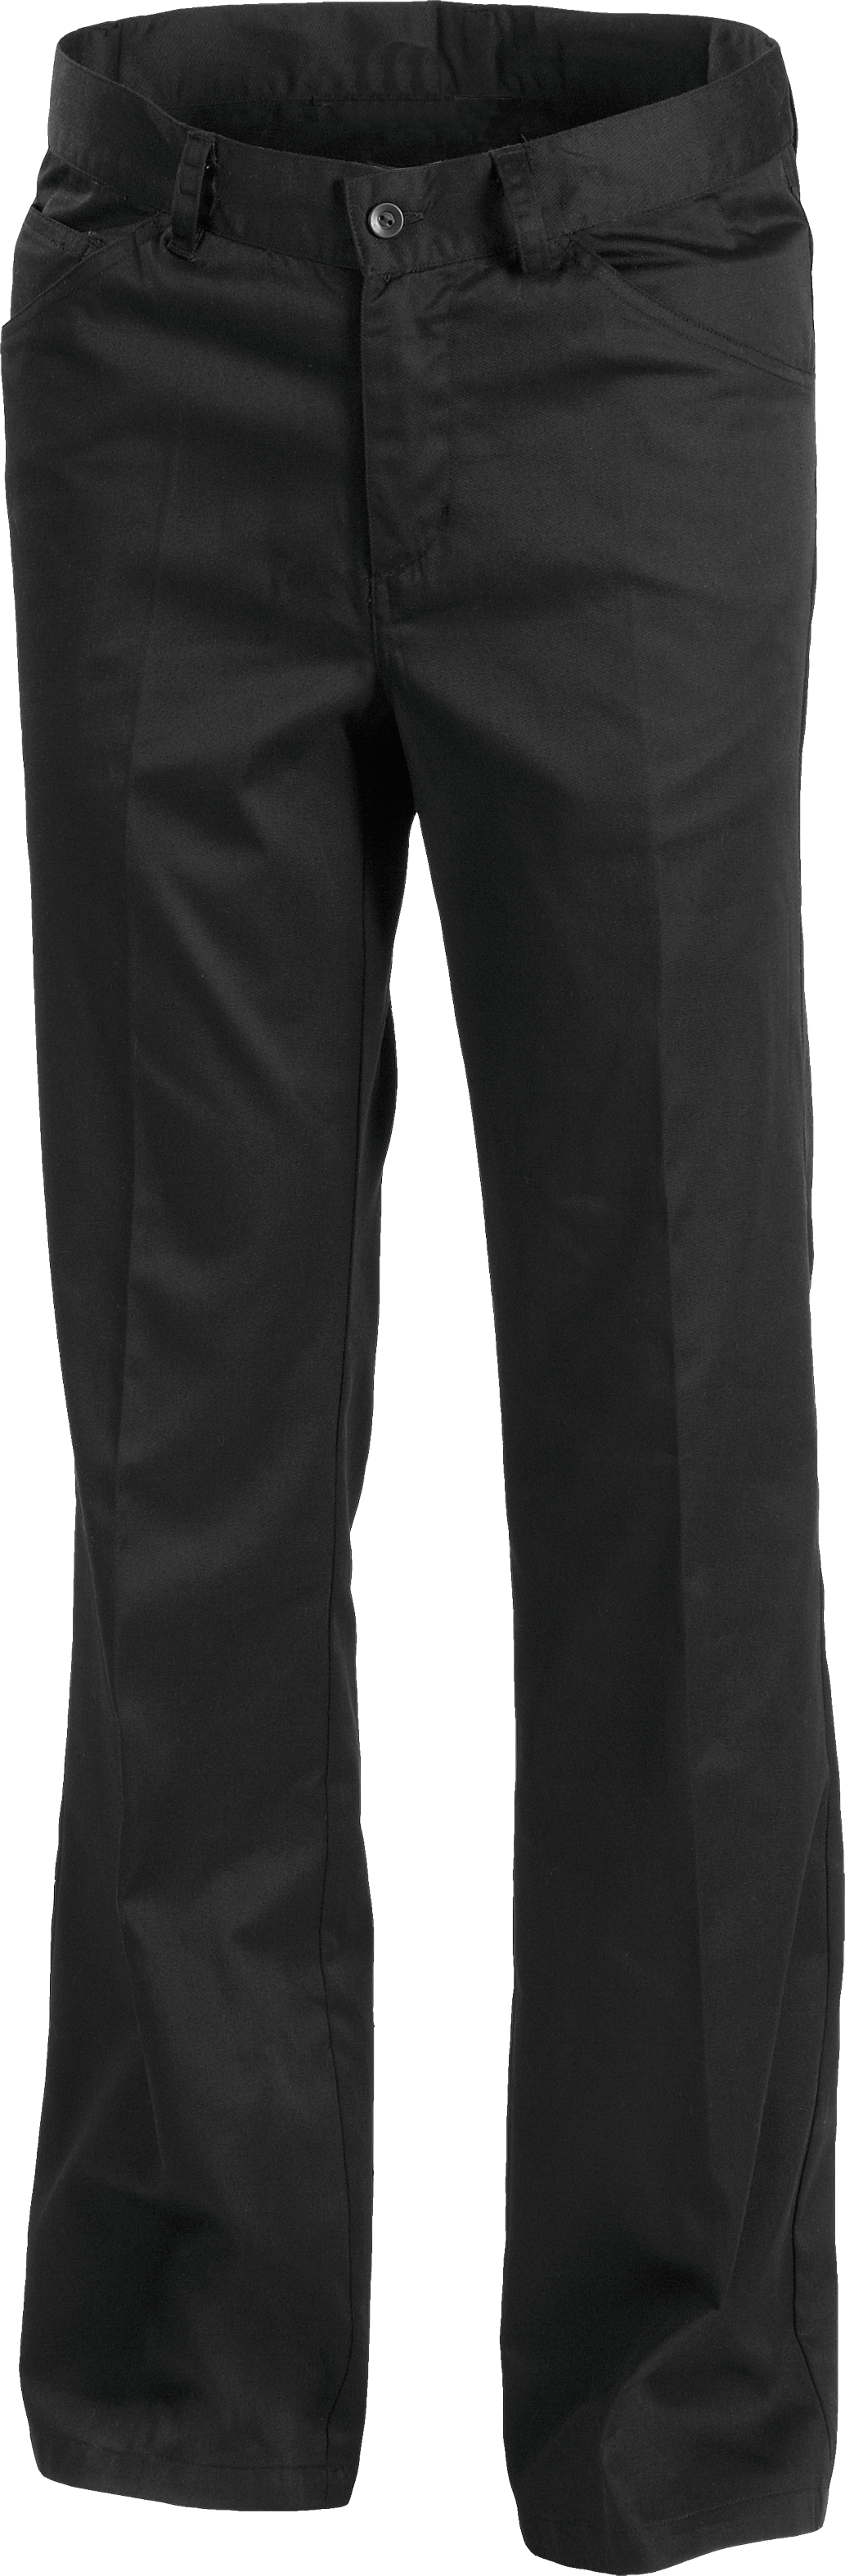 Relaxed Contemporary Chef Pant - CP13